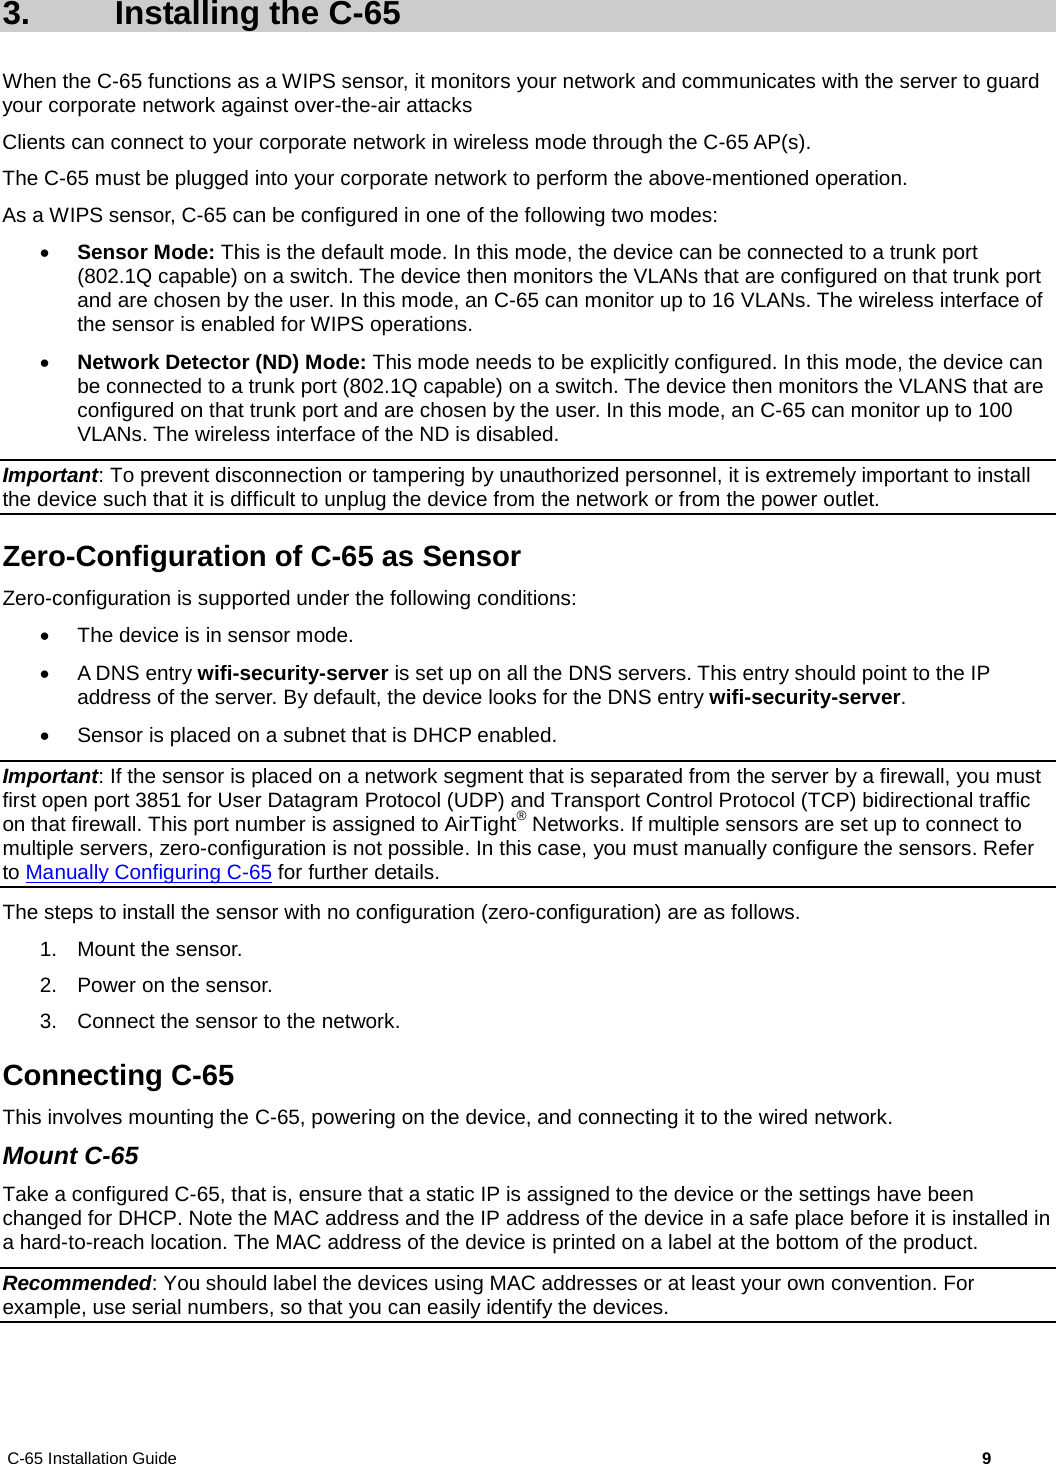 C-65 Installation Guide        9  3.  Installing the C-65 When the C-65 functions as a WIPS sensor, it monitors your network and communicates with the server to guard your corporate network against over-the-air attacks Clients can connect to your corporate network in wireless mode through the C-65 AP(s).  The C-65 must be plugged into your corporate network to perform the above-mentioned operation. As a WIPS sensor, C-65 can be configured in one of the following two modes: • Sensor Mode: This is the default mode. In this mode, the device can be connected to a trunk port (802.1Q capable) on a switch. The device then monitors the VLANs that are configured on that trunk port and are chosen by the user. In this mode, an C-65 can monitor up to 16 VLANs. The wireless interface of the sensor is enabled for WIPS operations. • Network Detector (ND) Mode: This mode needs to be explicitly configured. In this mode, the device can be connected to a trunk port (802.1Q capable) on a switch. The device then monitors the VLANS that are configured on that trunk port and are chosen by the user. In this mode, an C-65 can monitor up to 100 VLANs. The wireless interface of the ND is disabled. Important: To prevent disconnection or tampering by unauthorized personnel, it is extremely important to install the device such that it is difficult to unplug the device from the network or from the power outlet. Zero-Configuration of C-65 as Sensor Zero-configuration is supported under the following conditions: • The device is in sensor mode. • A DNS entry wifi-security-server is set up on all the DNS servers. This entry should point to the IP address of the server. By default, the device looks for the DNS entry wifi-security-server. • Sensor is placed on a subnet that is DHCP enabled. Important: If the sensor is placed on a network segment that is separated from the server by a firewall, you must first open port 3851 for User Datagram Protocol (UDP) and Transport Control Protocol (TCP) bidirectional traffic on that firewall. This port number is assigned to AirTight® Networks. If multiple sensors are set up to connect to multiple servers, zero-configuration is not possible. In this case, you must manually configure the sensors. Refer to Manually Configuring C-65 for further details. The steps to install the sensor with no configuration (zero-configuration) are as follows. 1. Mount the sensor. 2. Power on the sensor. 3. Connect the sensor to the network. Connecting C-65 This involves mounting the C-65, powering on the device, and connecting it to the wired network. Mount C-65 Take a configured C-65, that is, ensure that a static IP is assigned to the device or the settings have been changed for DHCP. Note the MAC address and the IP address of the device in a safe place before it is installed in a hard-to-reach location. The MAC address of the device is printed on a label at the bottom of the product. Recommended: You should label the devices using MAC addresses or at least your own convention. For example, use serial numbers, so that you can easily identify the devices. 